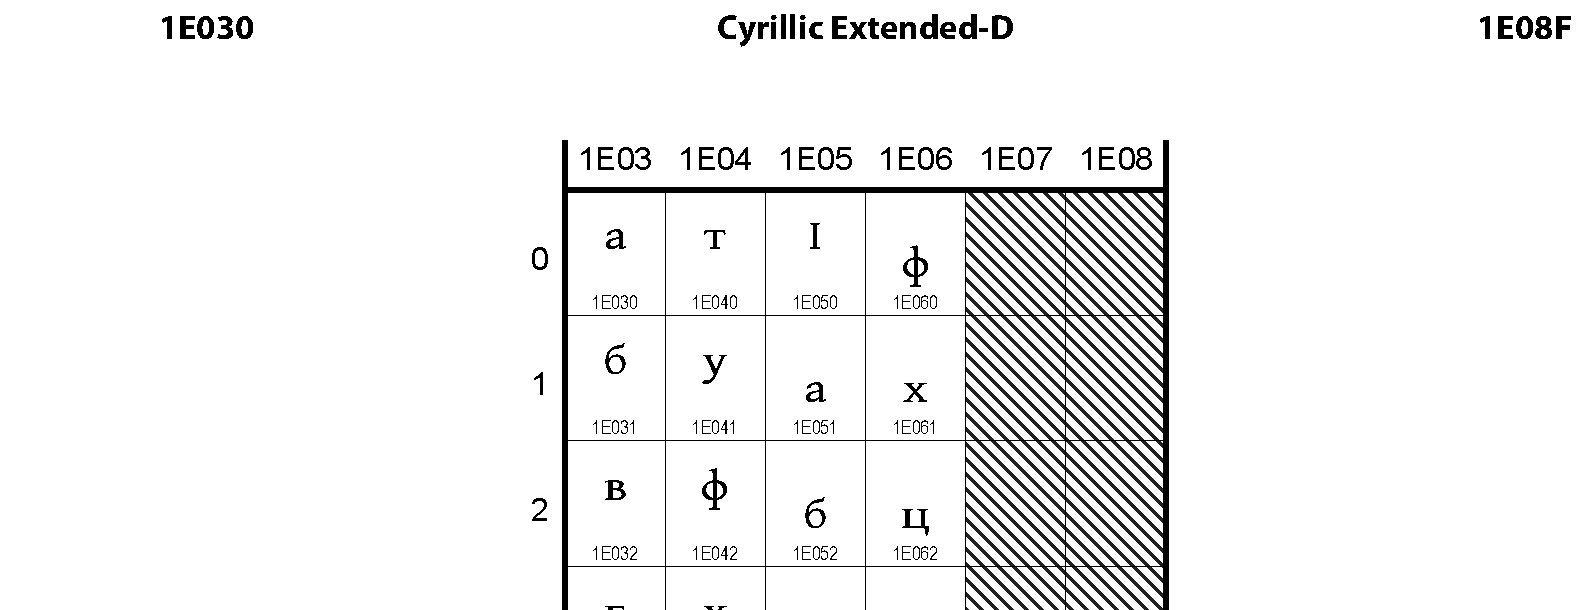 Unicode - Cyrillic Extended-D